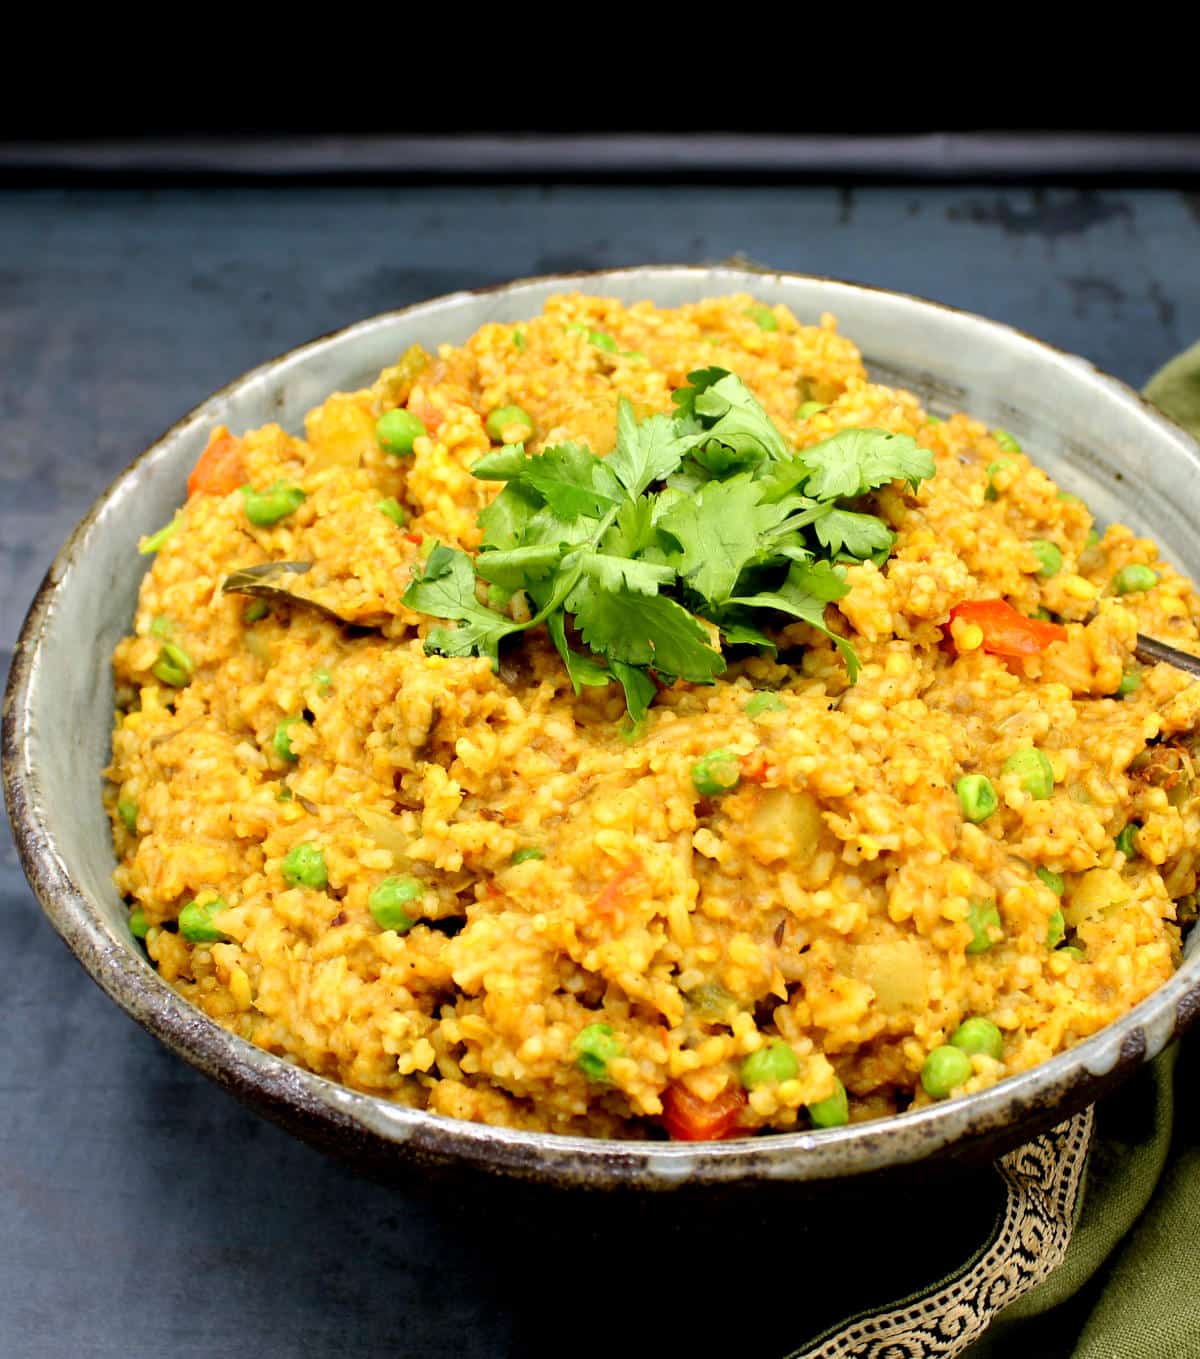 Front photo of a large earthenware bowl filled with masala khichdi, an Indian rice and lentil dish, with cilantro garnish.